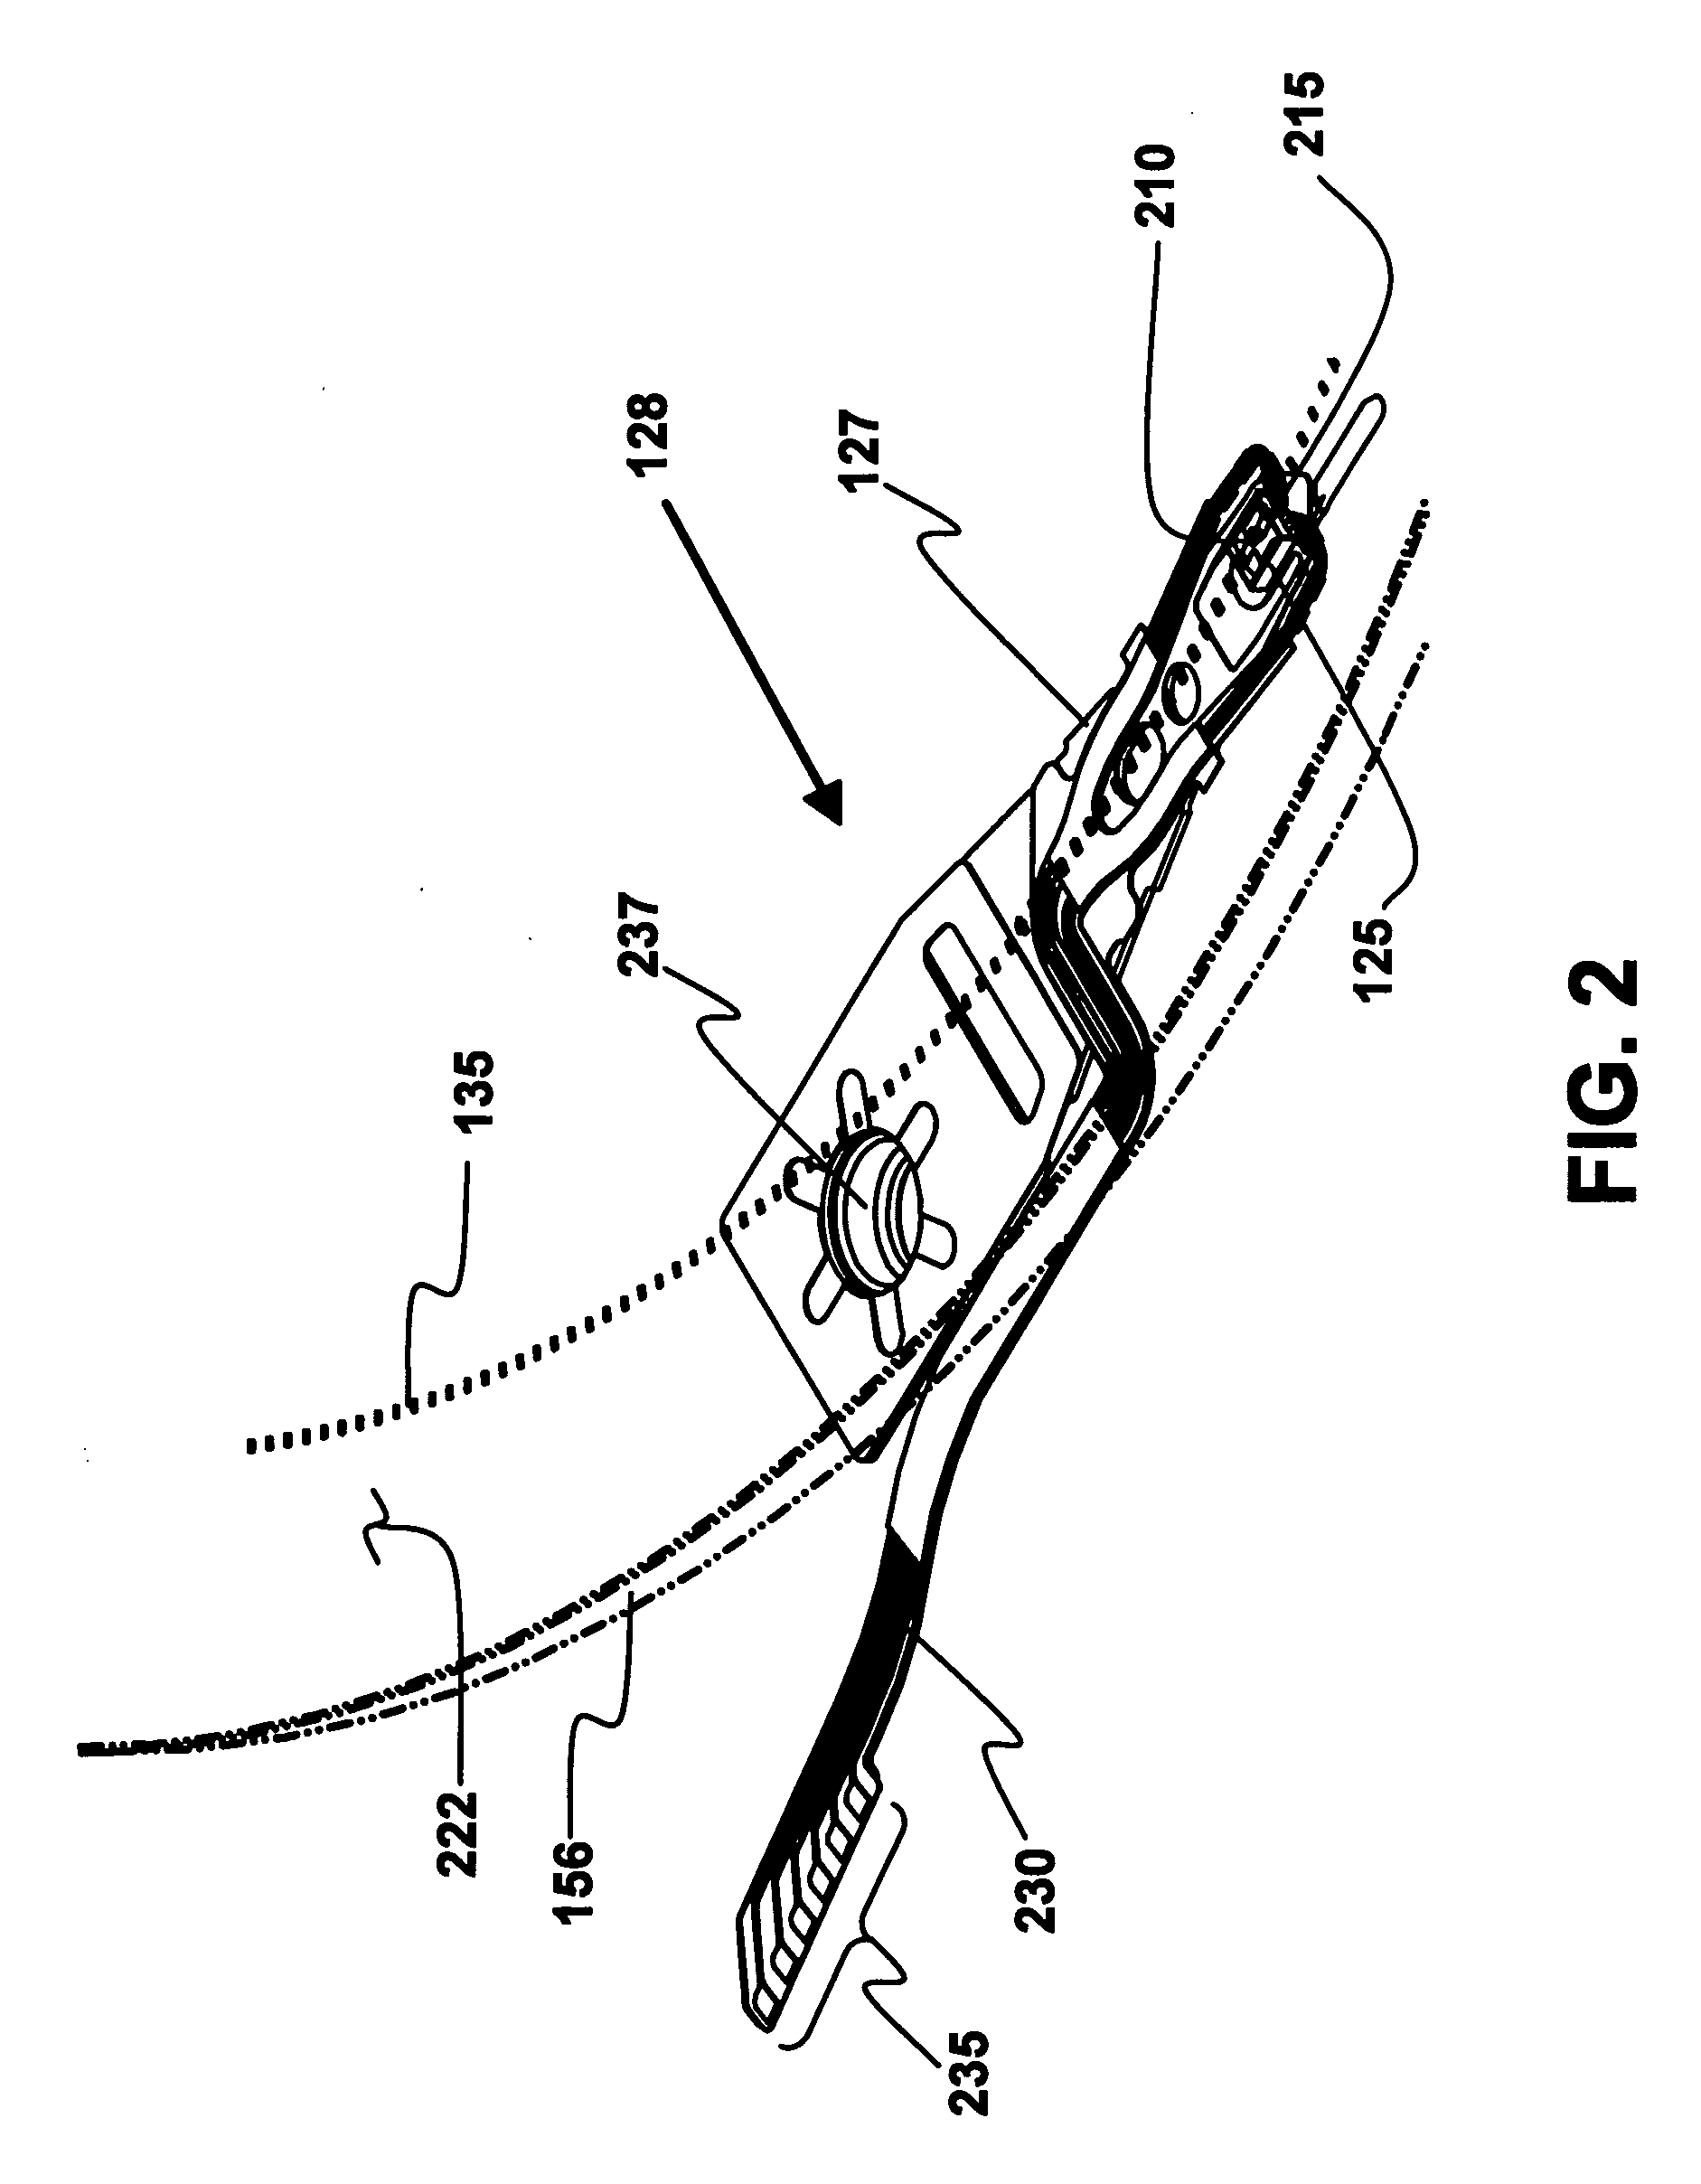 Magnetic performance of a magnetic transducer operating within a hard disk drive